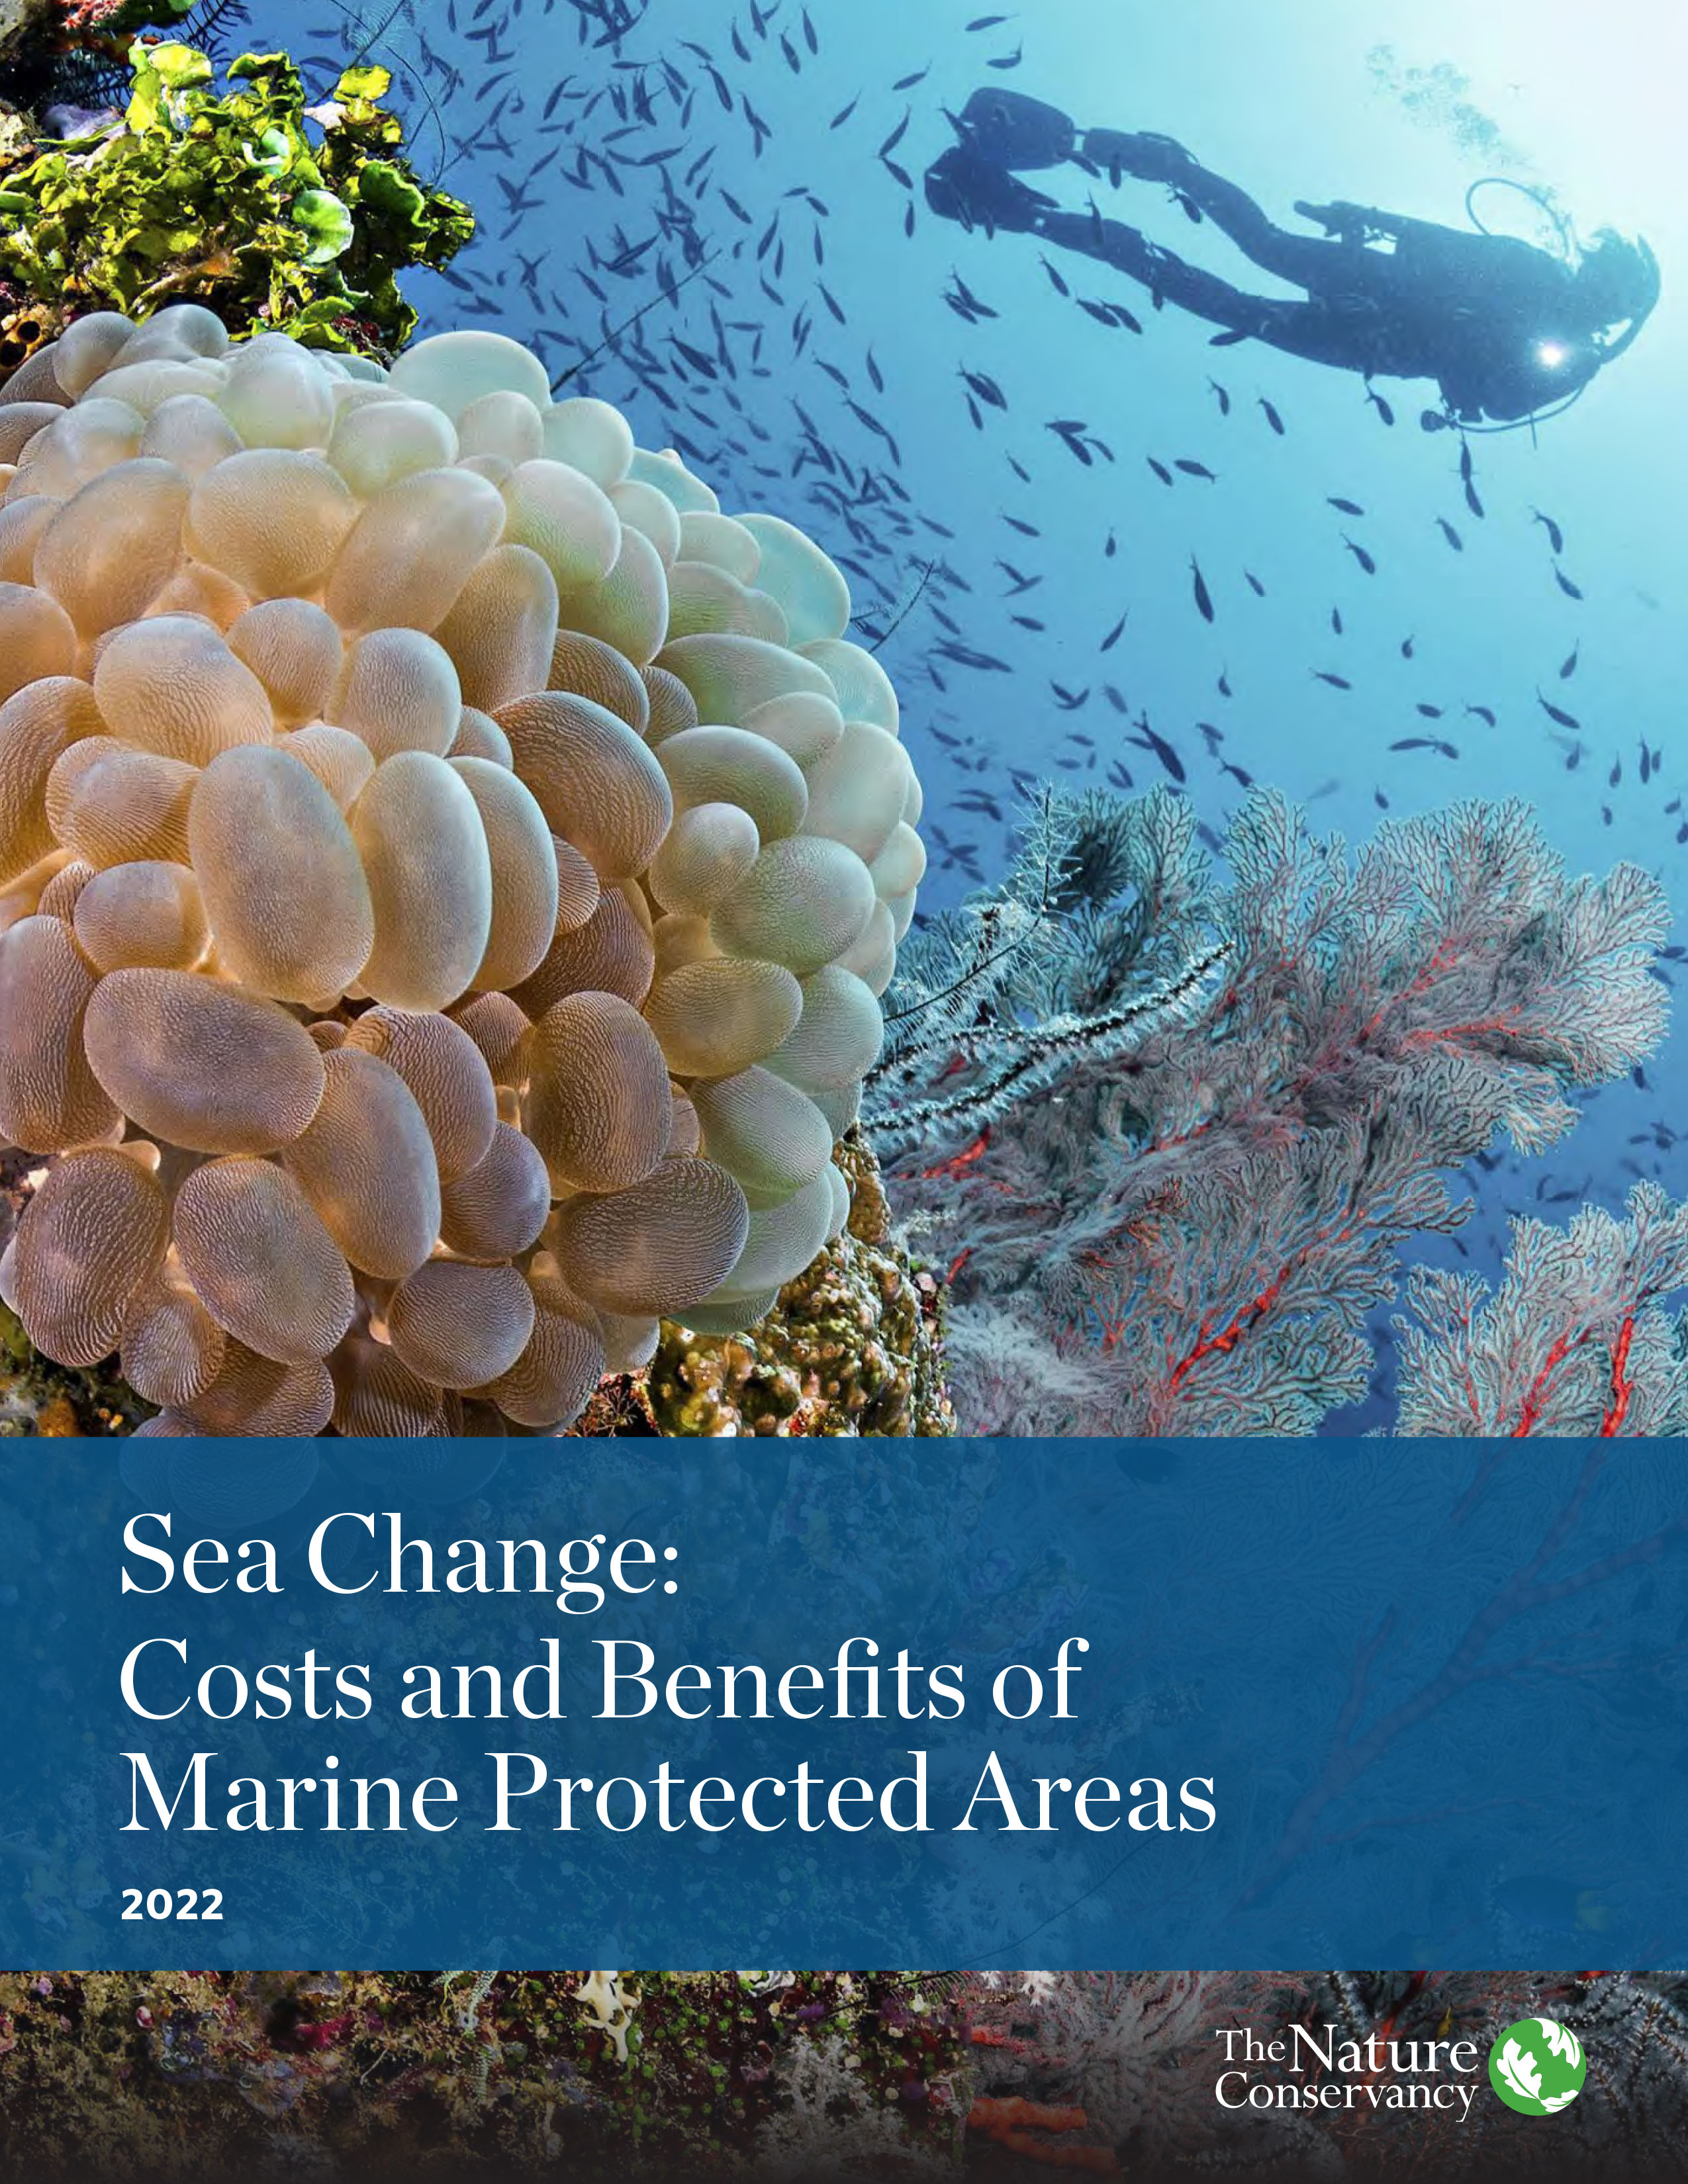 Front page of the Sea Change report.